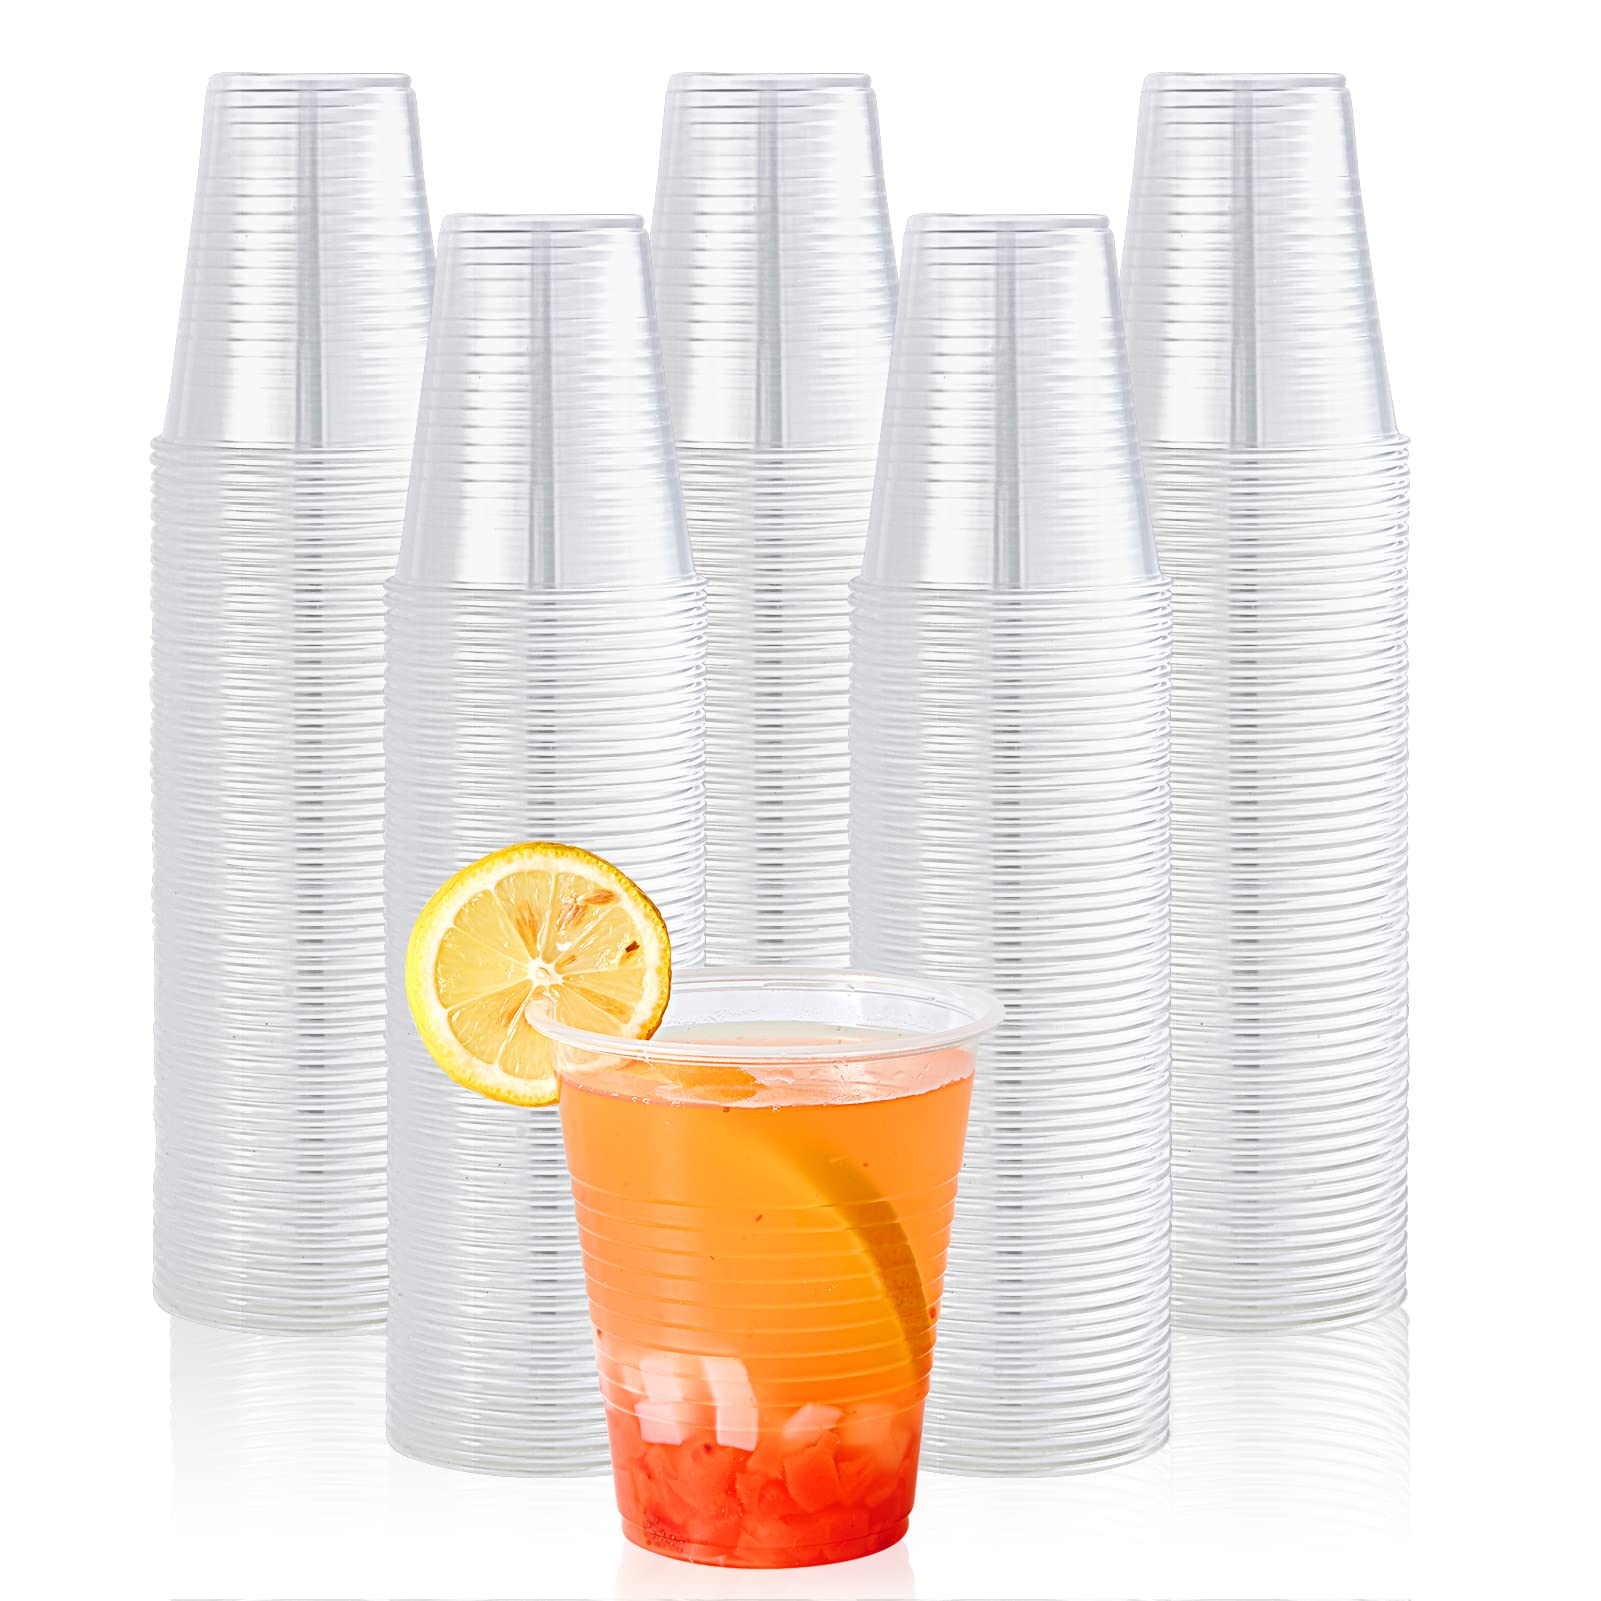 Lilymicky 500 Pack 7 oz Clear Plastic Cups, Disposable Drinking Cups,  Plastic Party Cups for Birthda…See more Lilymicky 500 Pack 7 oz Clear  Plastic